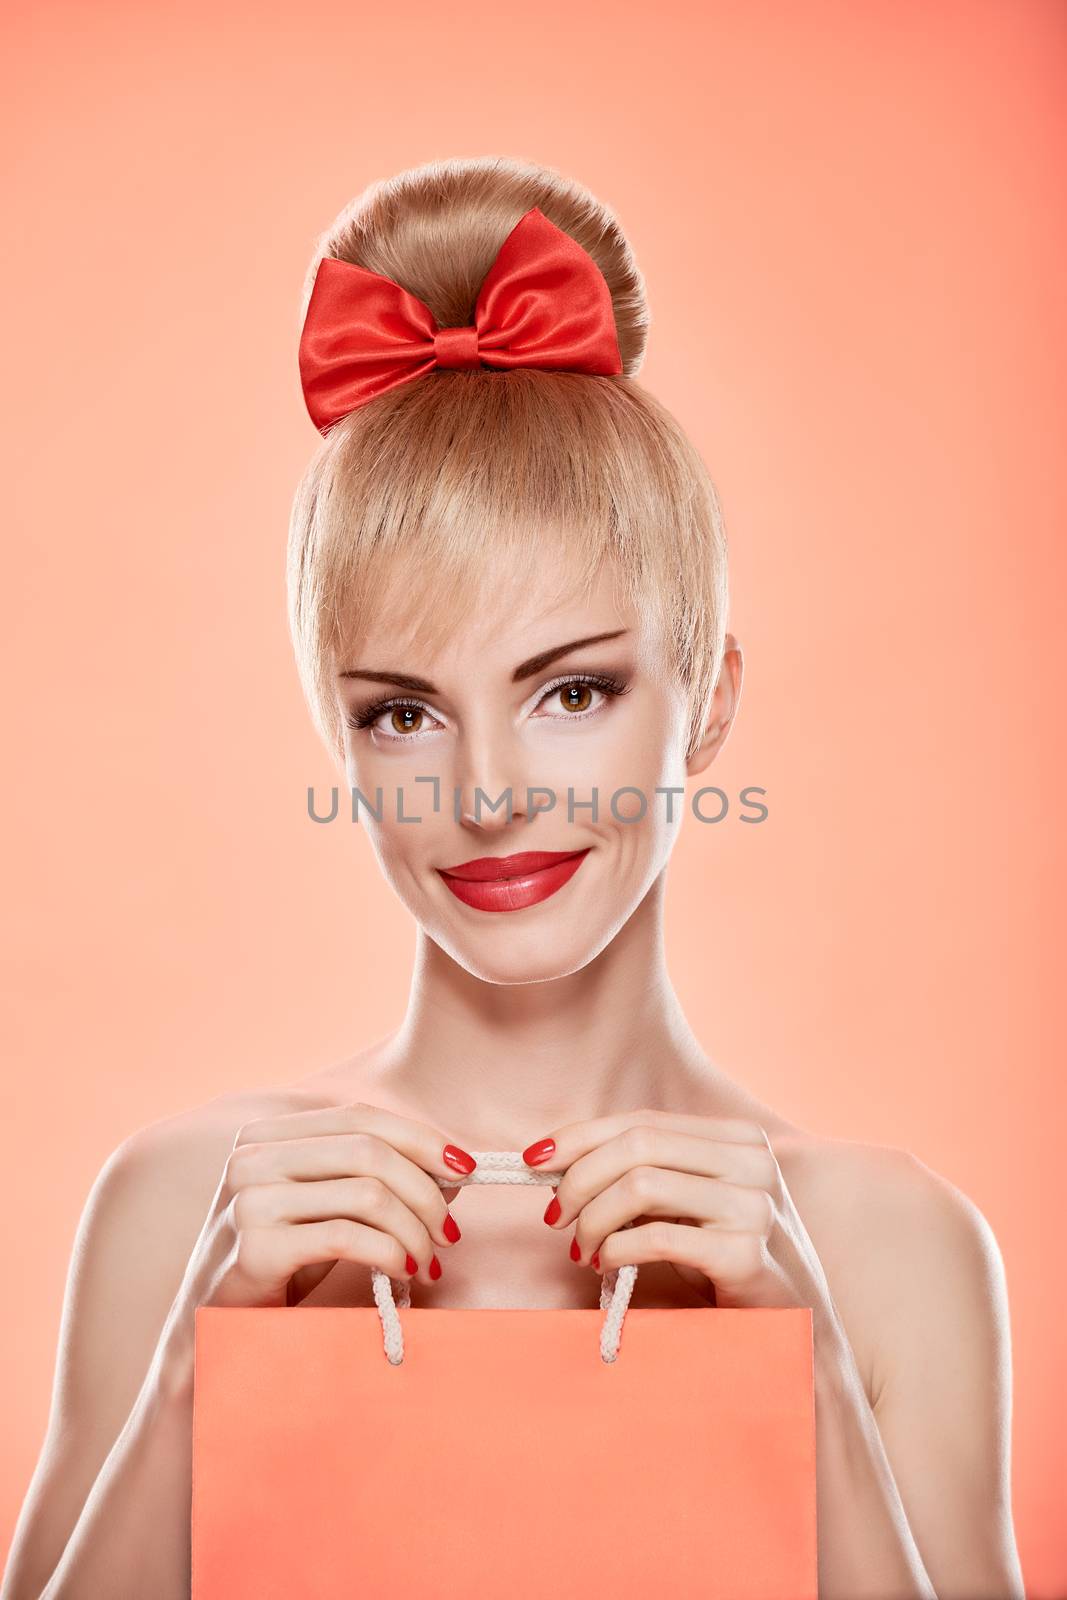 Beauty fashion portrait loving woman smiling with shopping bag. Confidence sensual attractive pretty nude blonde sexy girl, Pinup hairstyle, red bow. Unusual playful. Romantic on pink, sale, discount